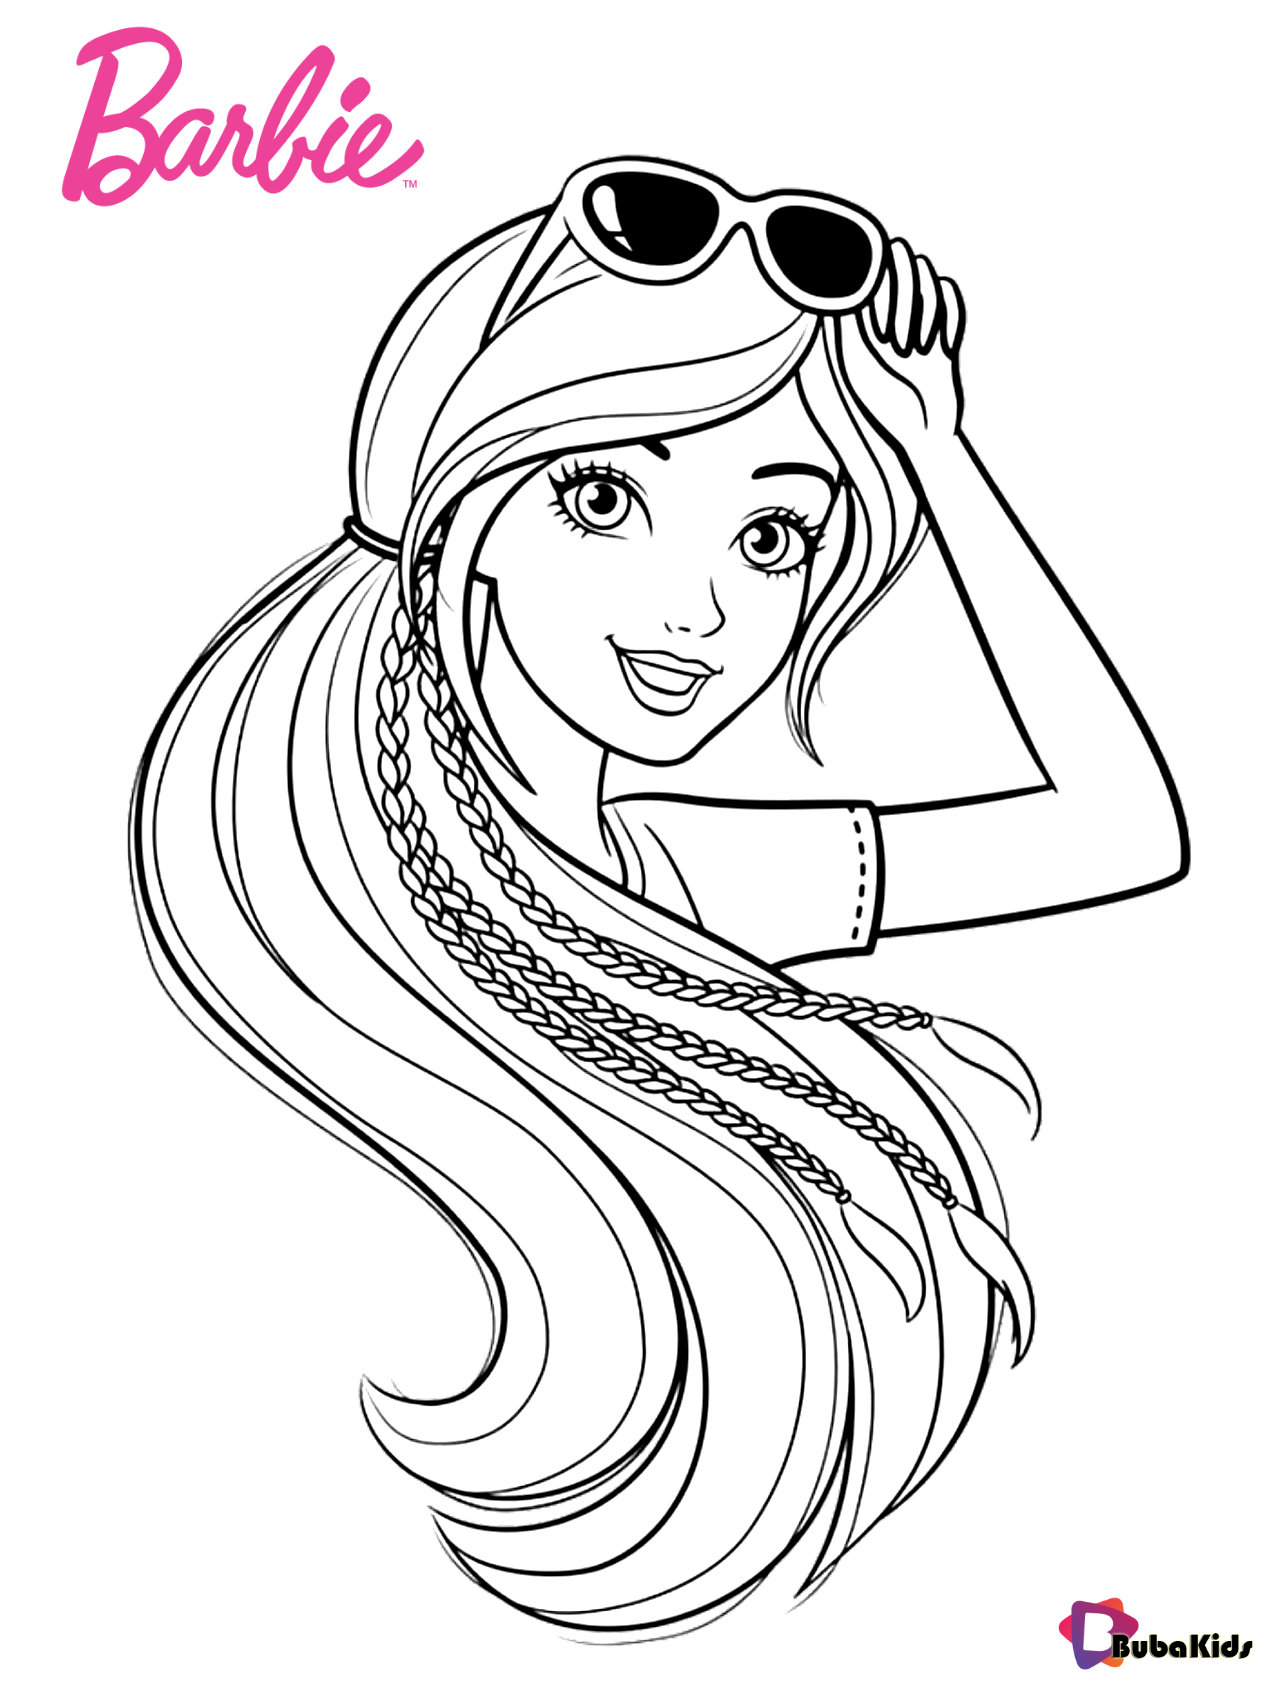 Barbie coloring pages for girls Wallpaper